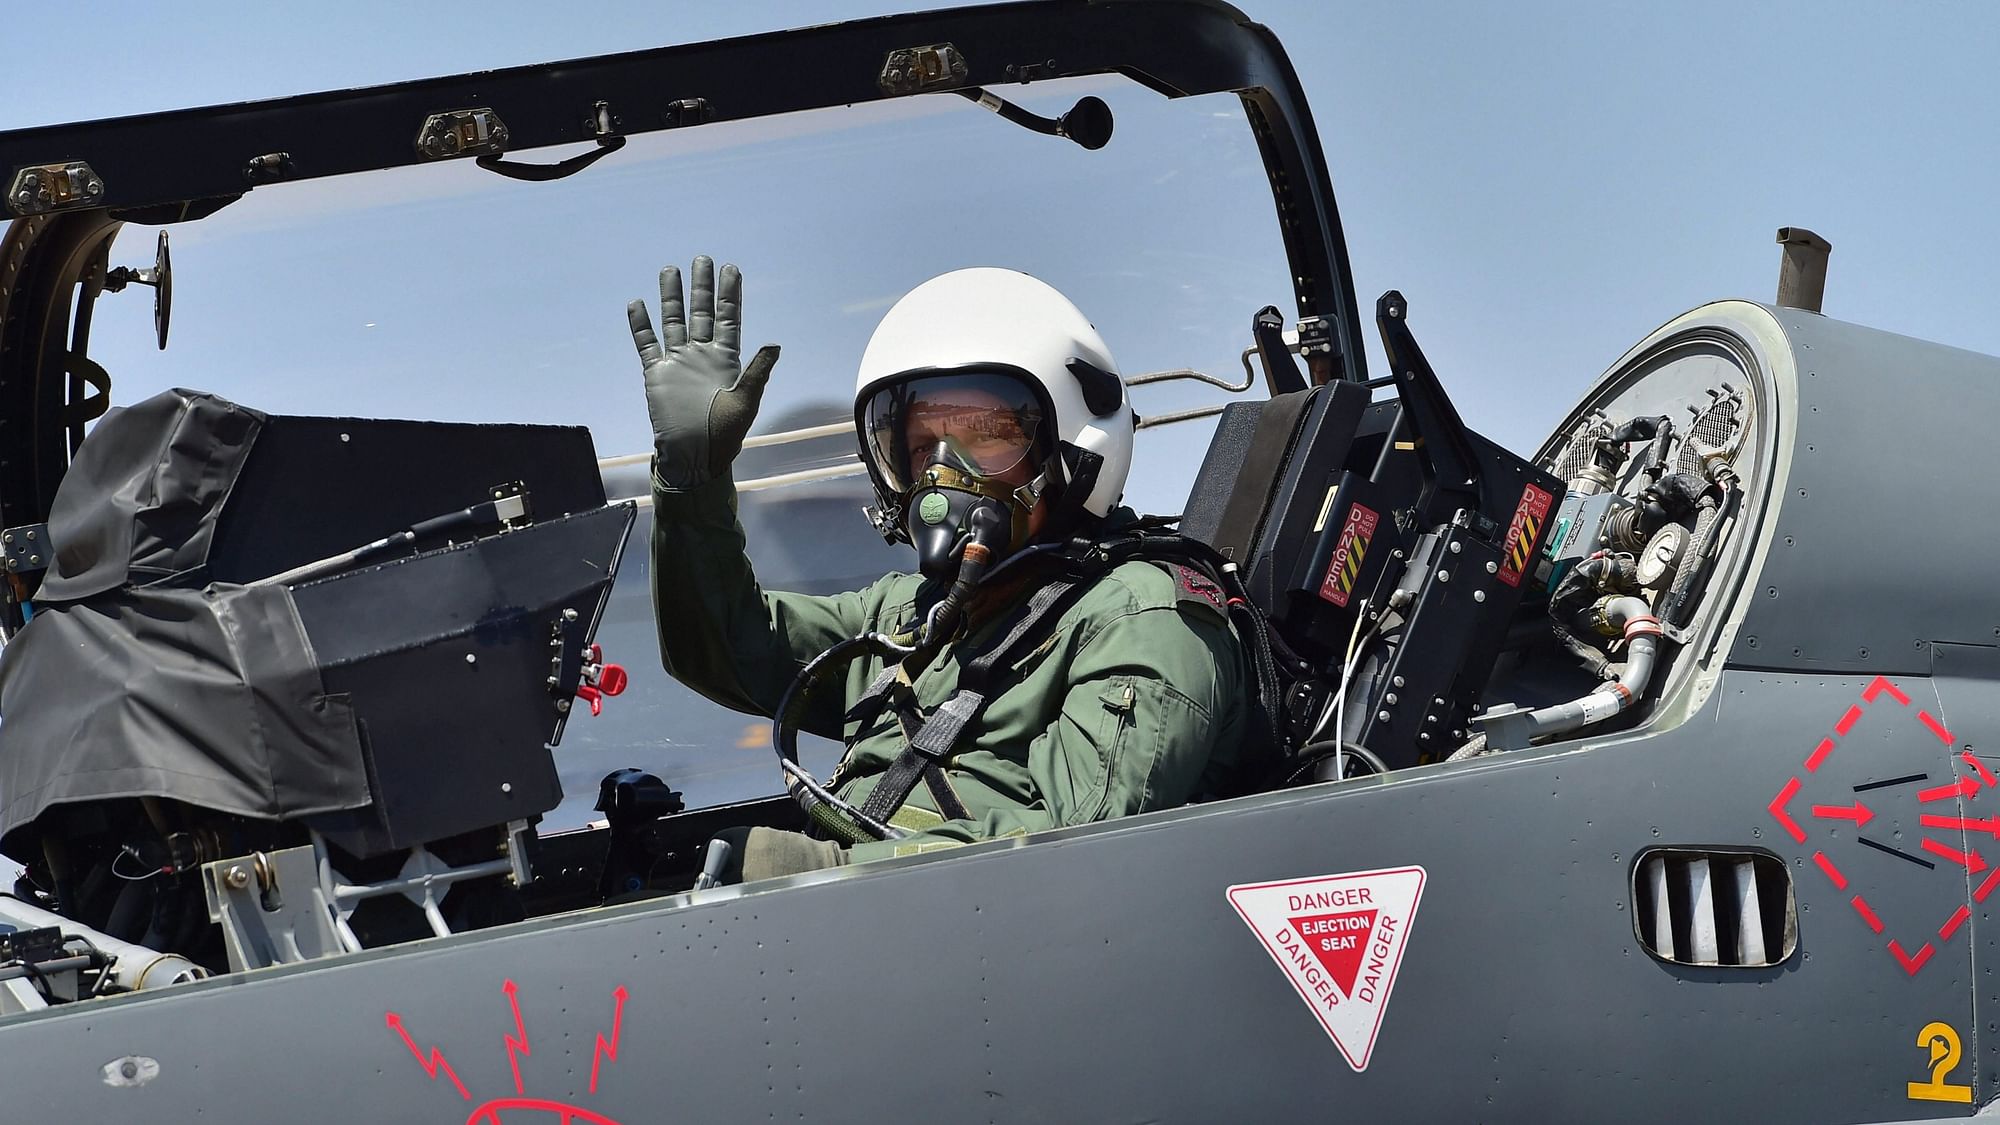 Chief of Army Staff Gen Bipin Rawat waves from the cockpit of the Light Combat Aircraft Tejas before a sortie on the 2nd day of the 12th edition of Aero India 2019 air show at Yelahanka air base in Bengaluru.